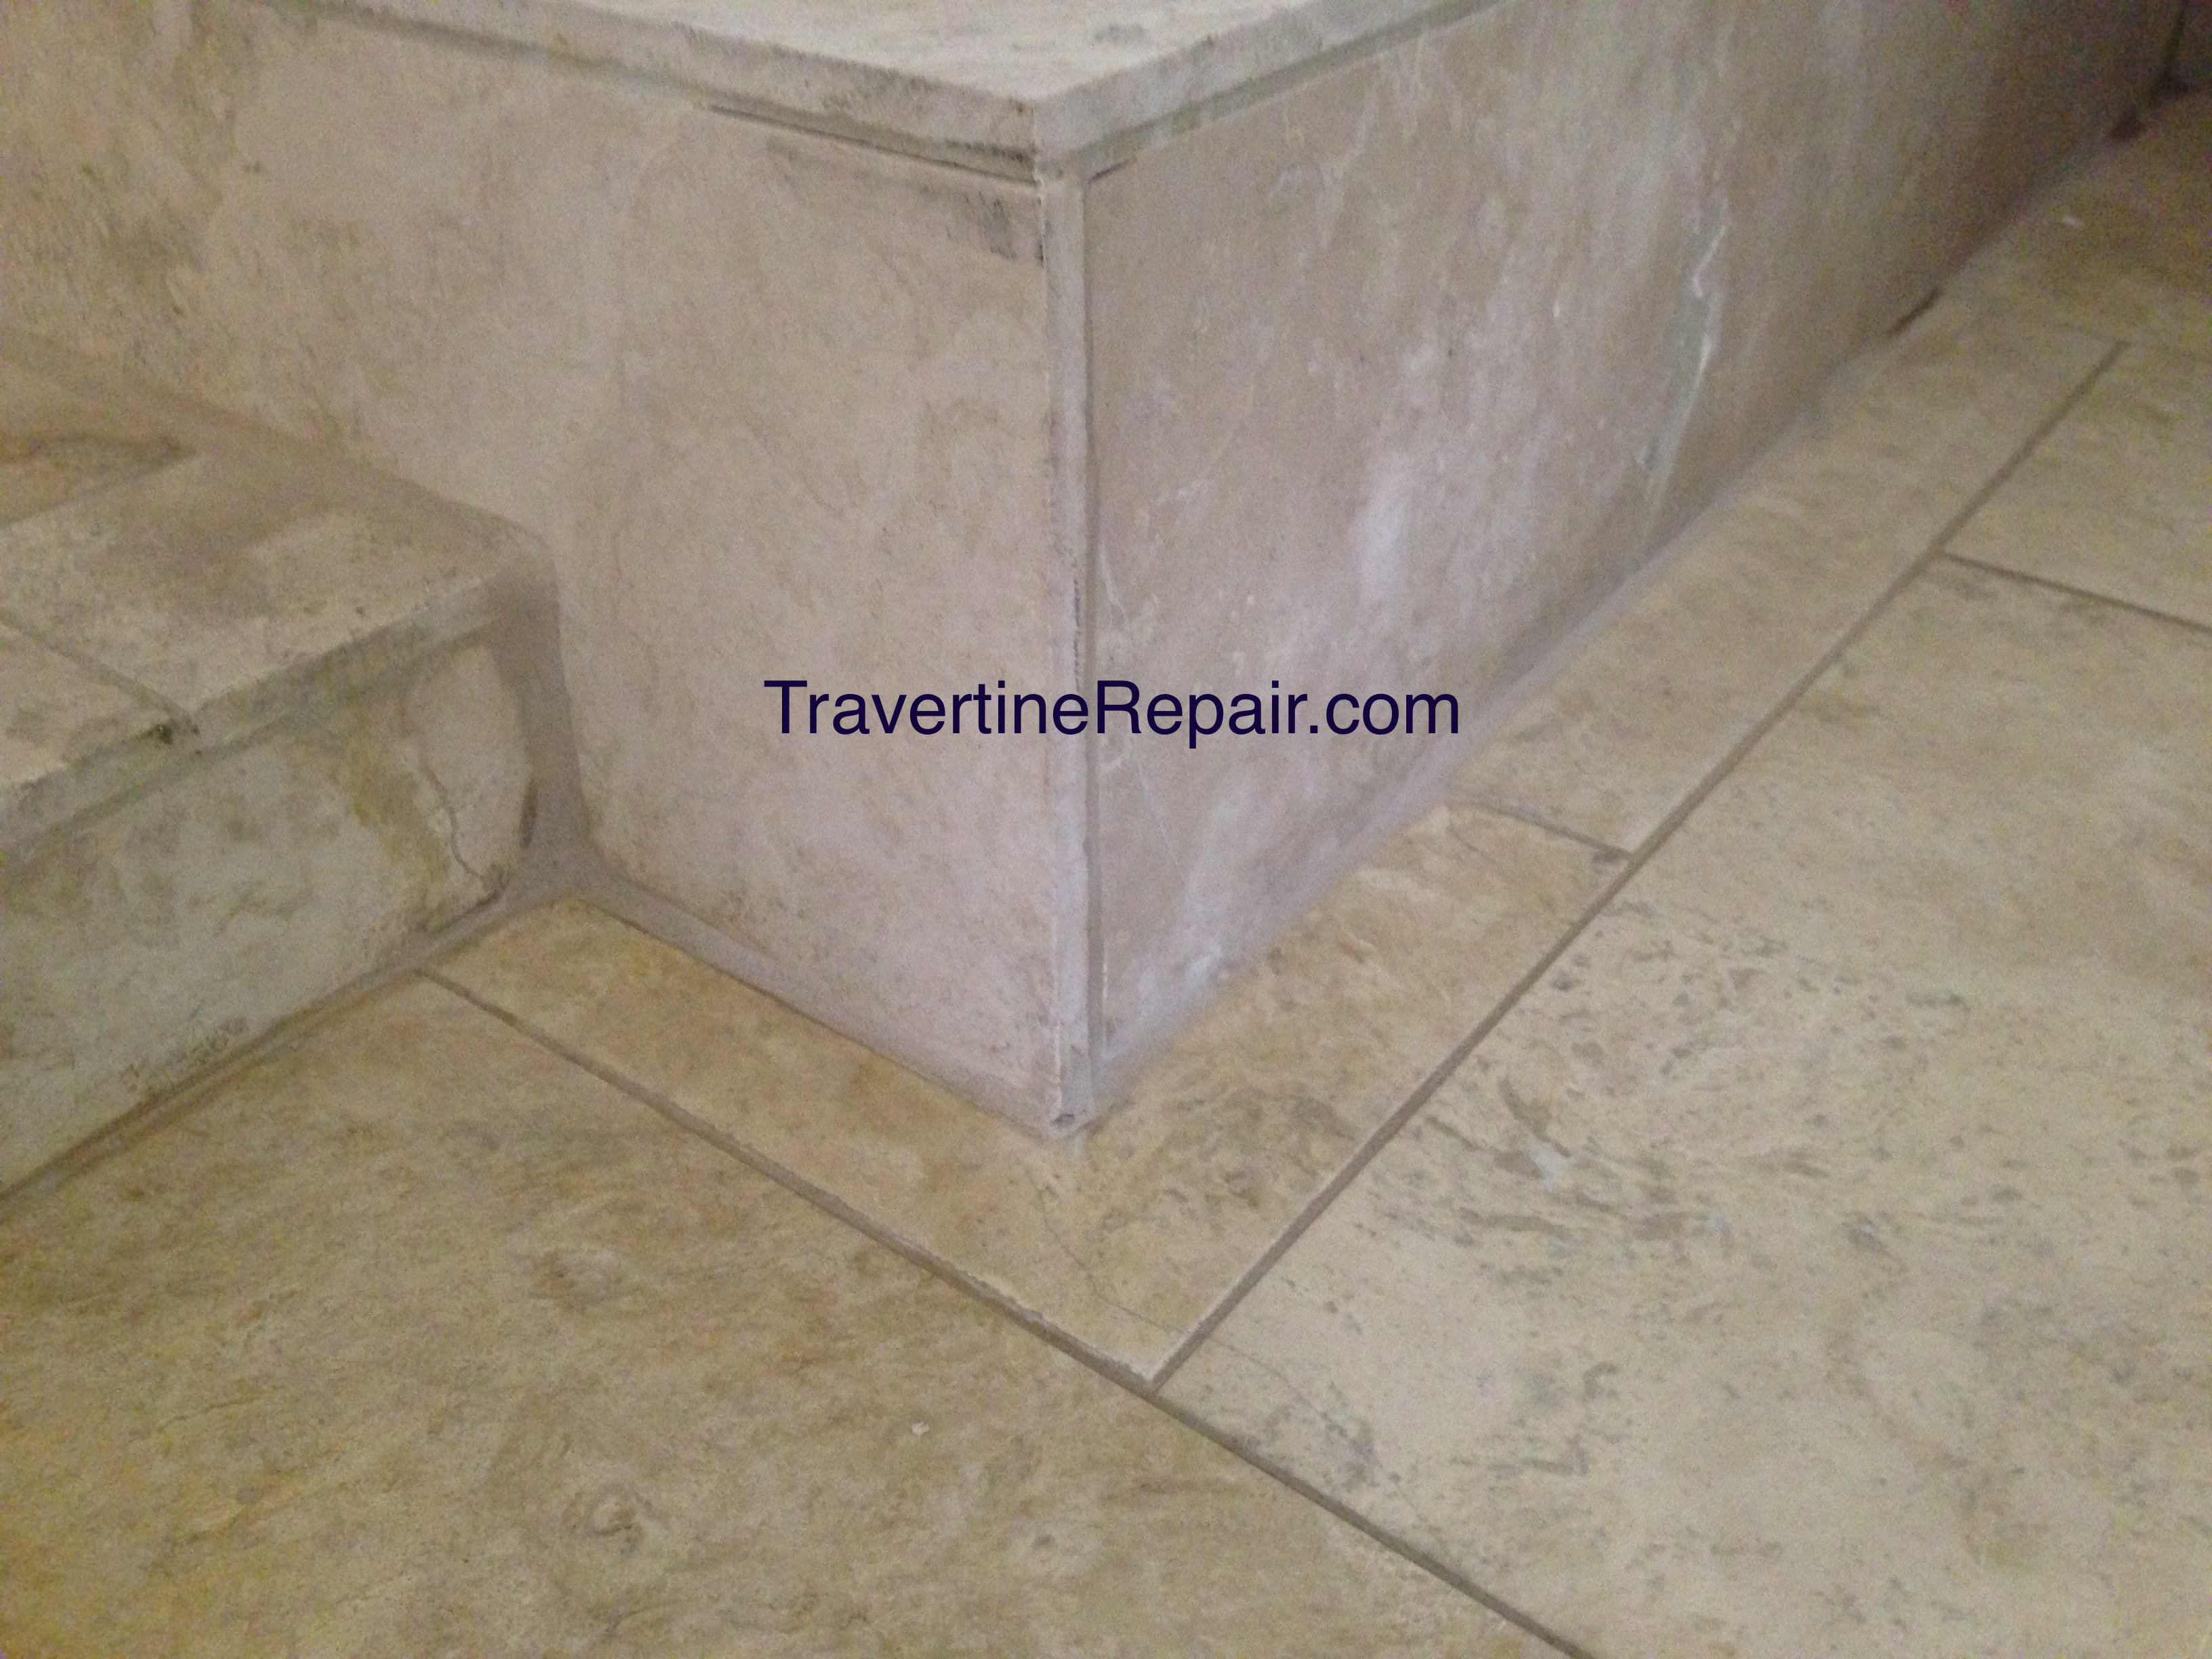 travertine cracked and broken after repairs